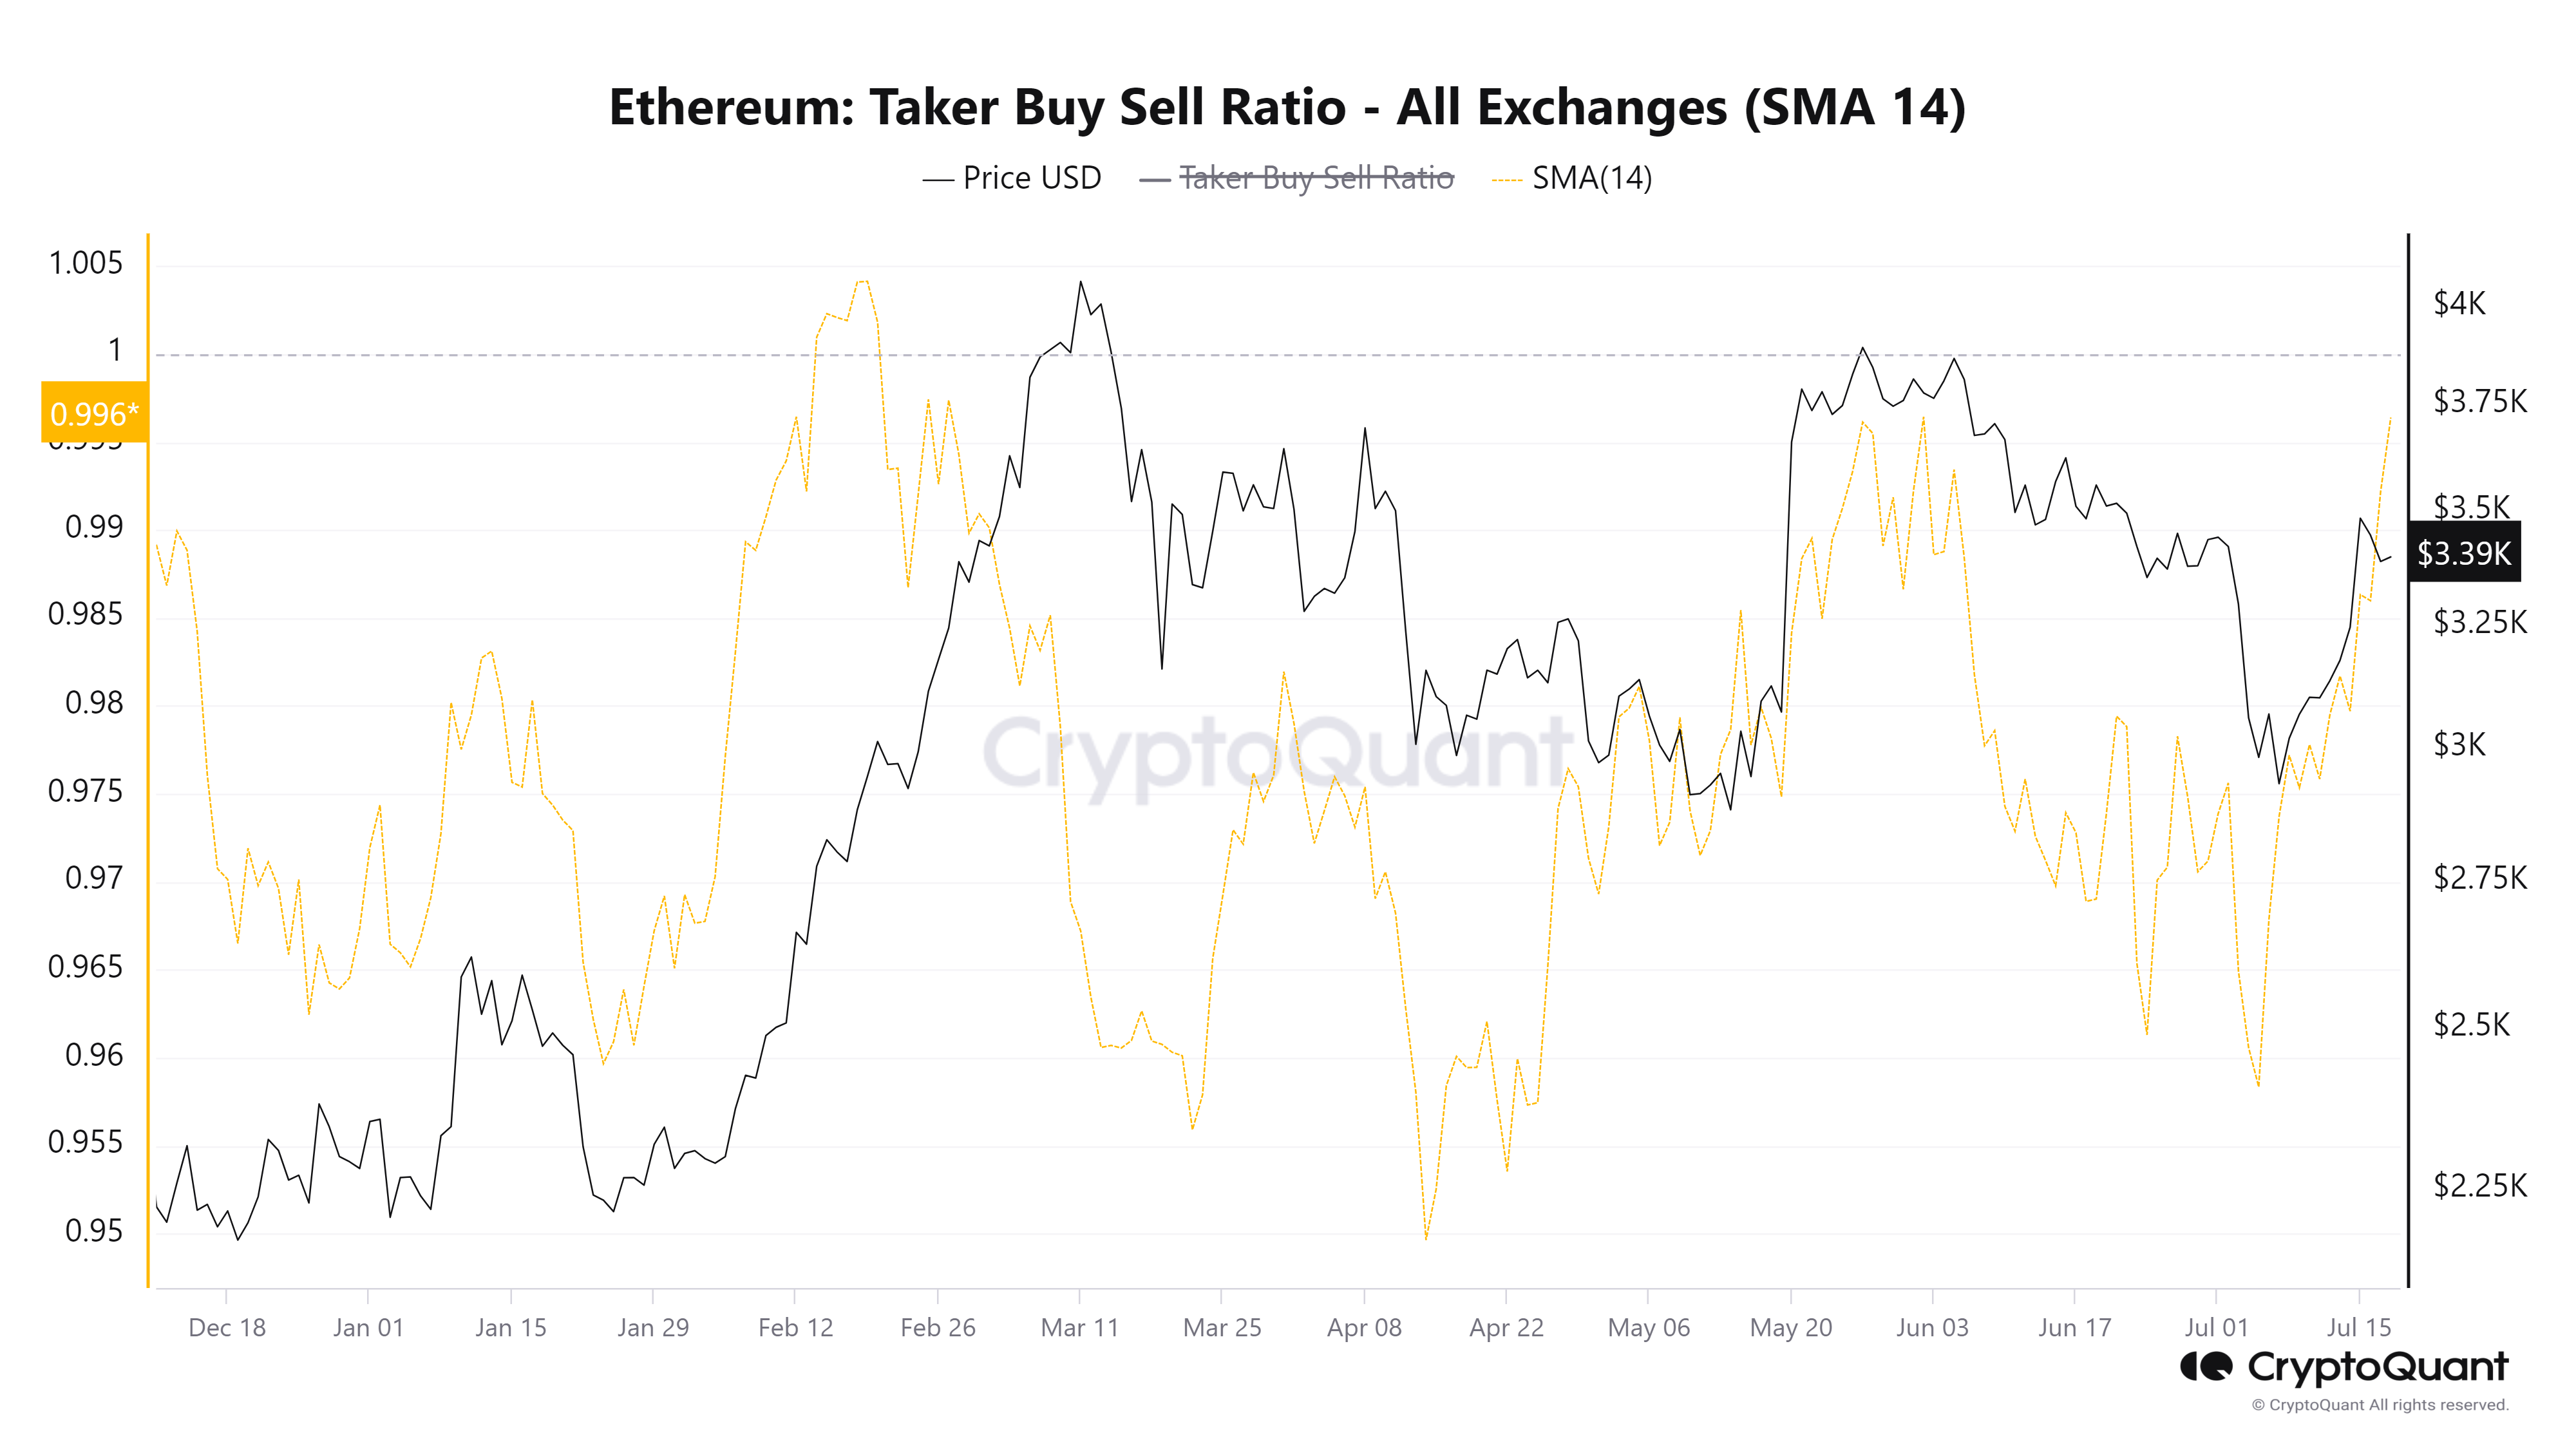 ETH Taker Buy/Sell Ratio